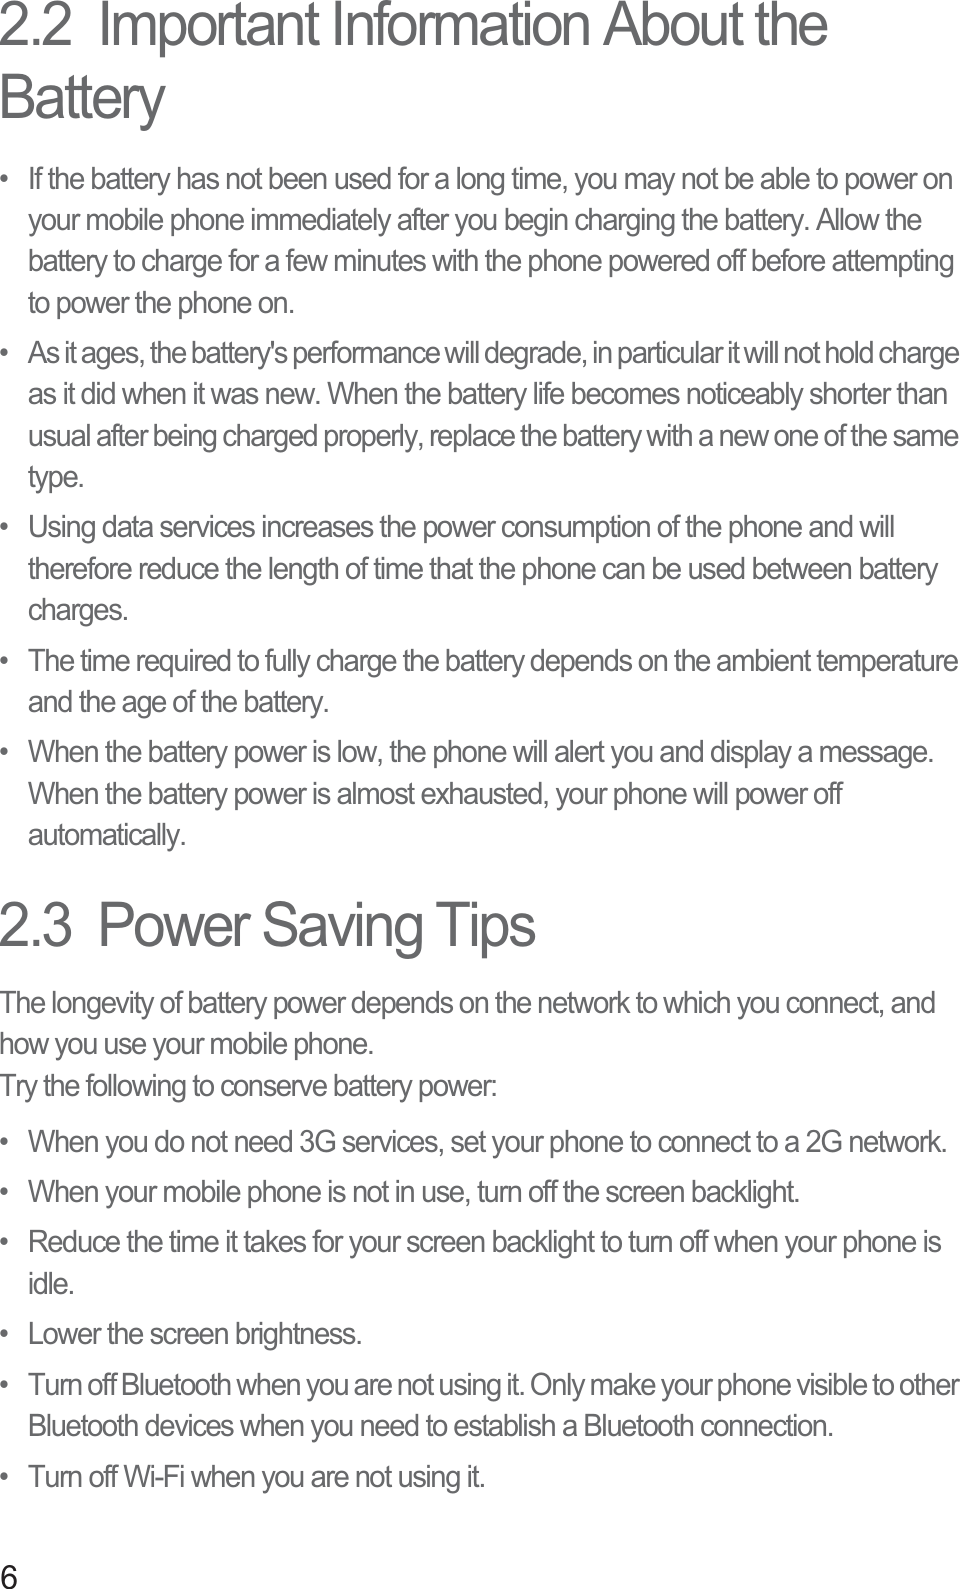 62.2  Important Information About the Battery•  If the battery has not been used for a long time, you may not be able to power on your mobile phone immediately after you begin charging the battery. Allow the battery to charge for a few minutes with the phone powered off before attempting to power the phone on.•  As it ages, the battery&apos;s performance will degrade, in particular it will not hold charge as it did when it was new. When the battery life becomes noticeably shorter than usual after being charged properly, replace the battery with a new one of the same type.•  Using data services increases the power consumption of the phone and will therefore reduce the length of time that the phone can be used between battery charges.•  The time required to fully charge the battery depends on the ambient temperature and the age of the battery.•  When the battery power is low, the phone will alert you and display a message. When the battery power is almost exhausted, your phone will power off automatically.2.3  Power Saving Tips The longevity of battery power depends on the network to which you connect, and how you use your mobile phone.Try the following to conserve battery power:•  When you do not need 3G services, set your phone to connect to a 2G network.•  When your mobile phone is not in use, turn off the screen backlight.•  Reduce the time it takes for your screen backlight to turn off when your phone is idle.•  Lower the screen brightness.•  Turn off Bluetooth when you are not using it. Only make your phone visible to other Bluetooth devices when you need to establish a Bluetooth connection.•  Turn off Wi-Fi when you are not using it.